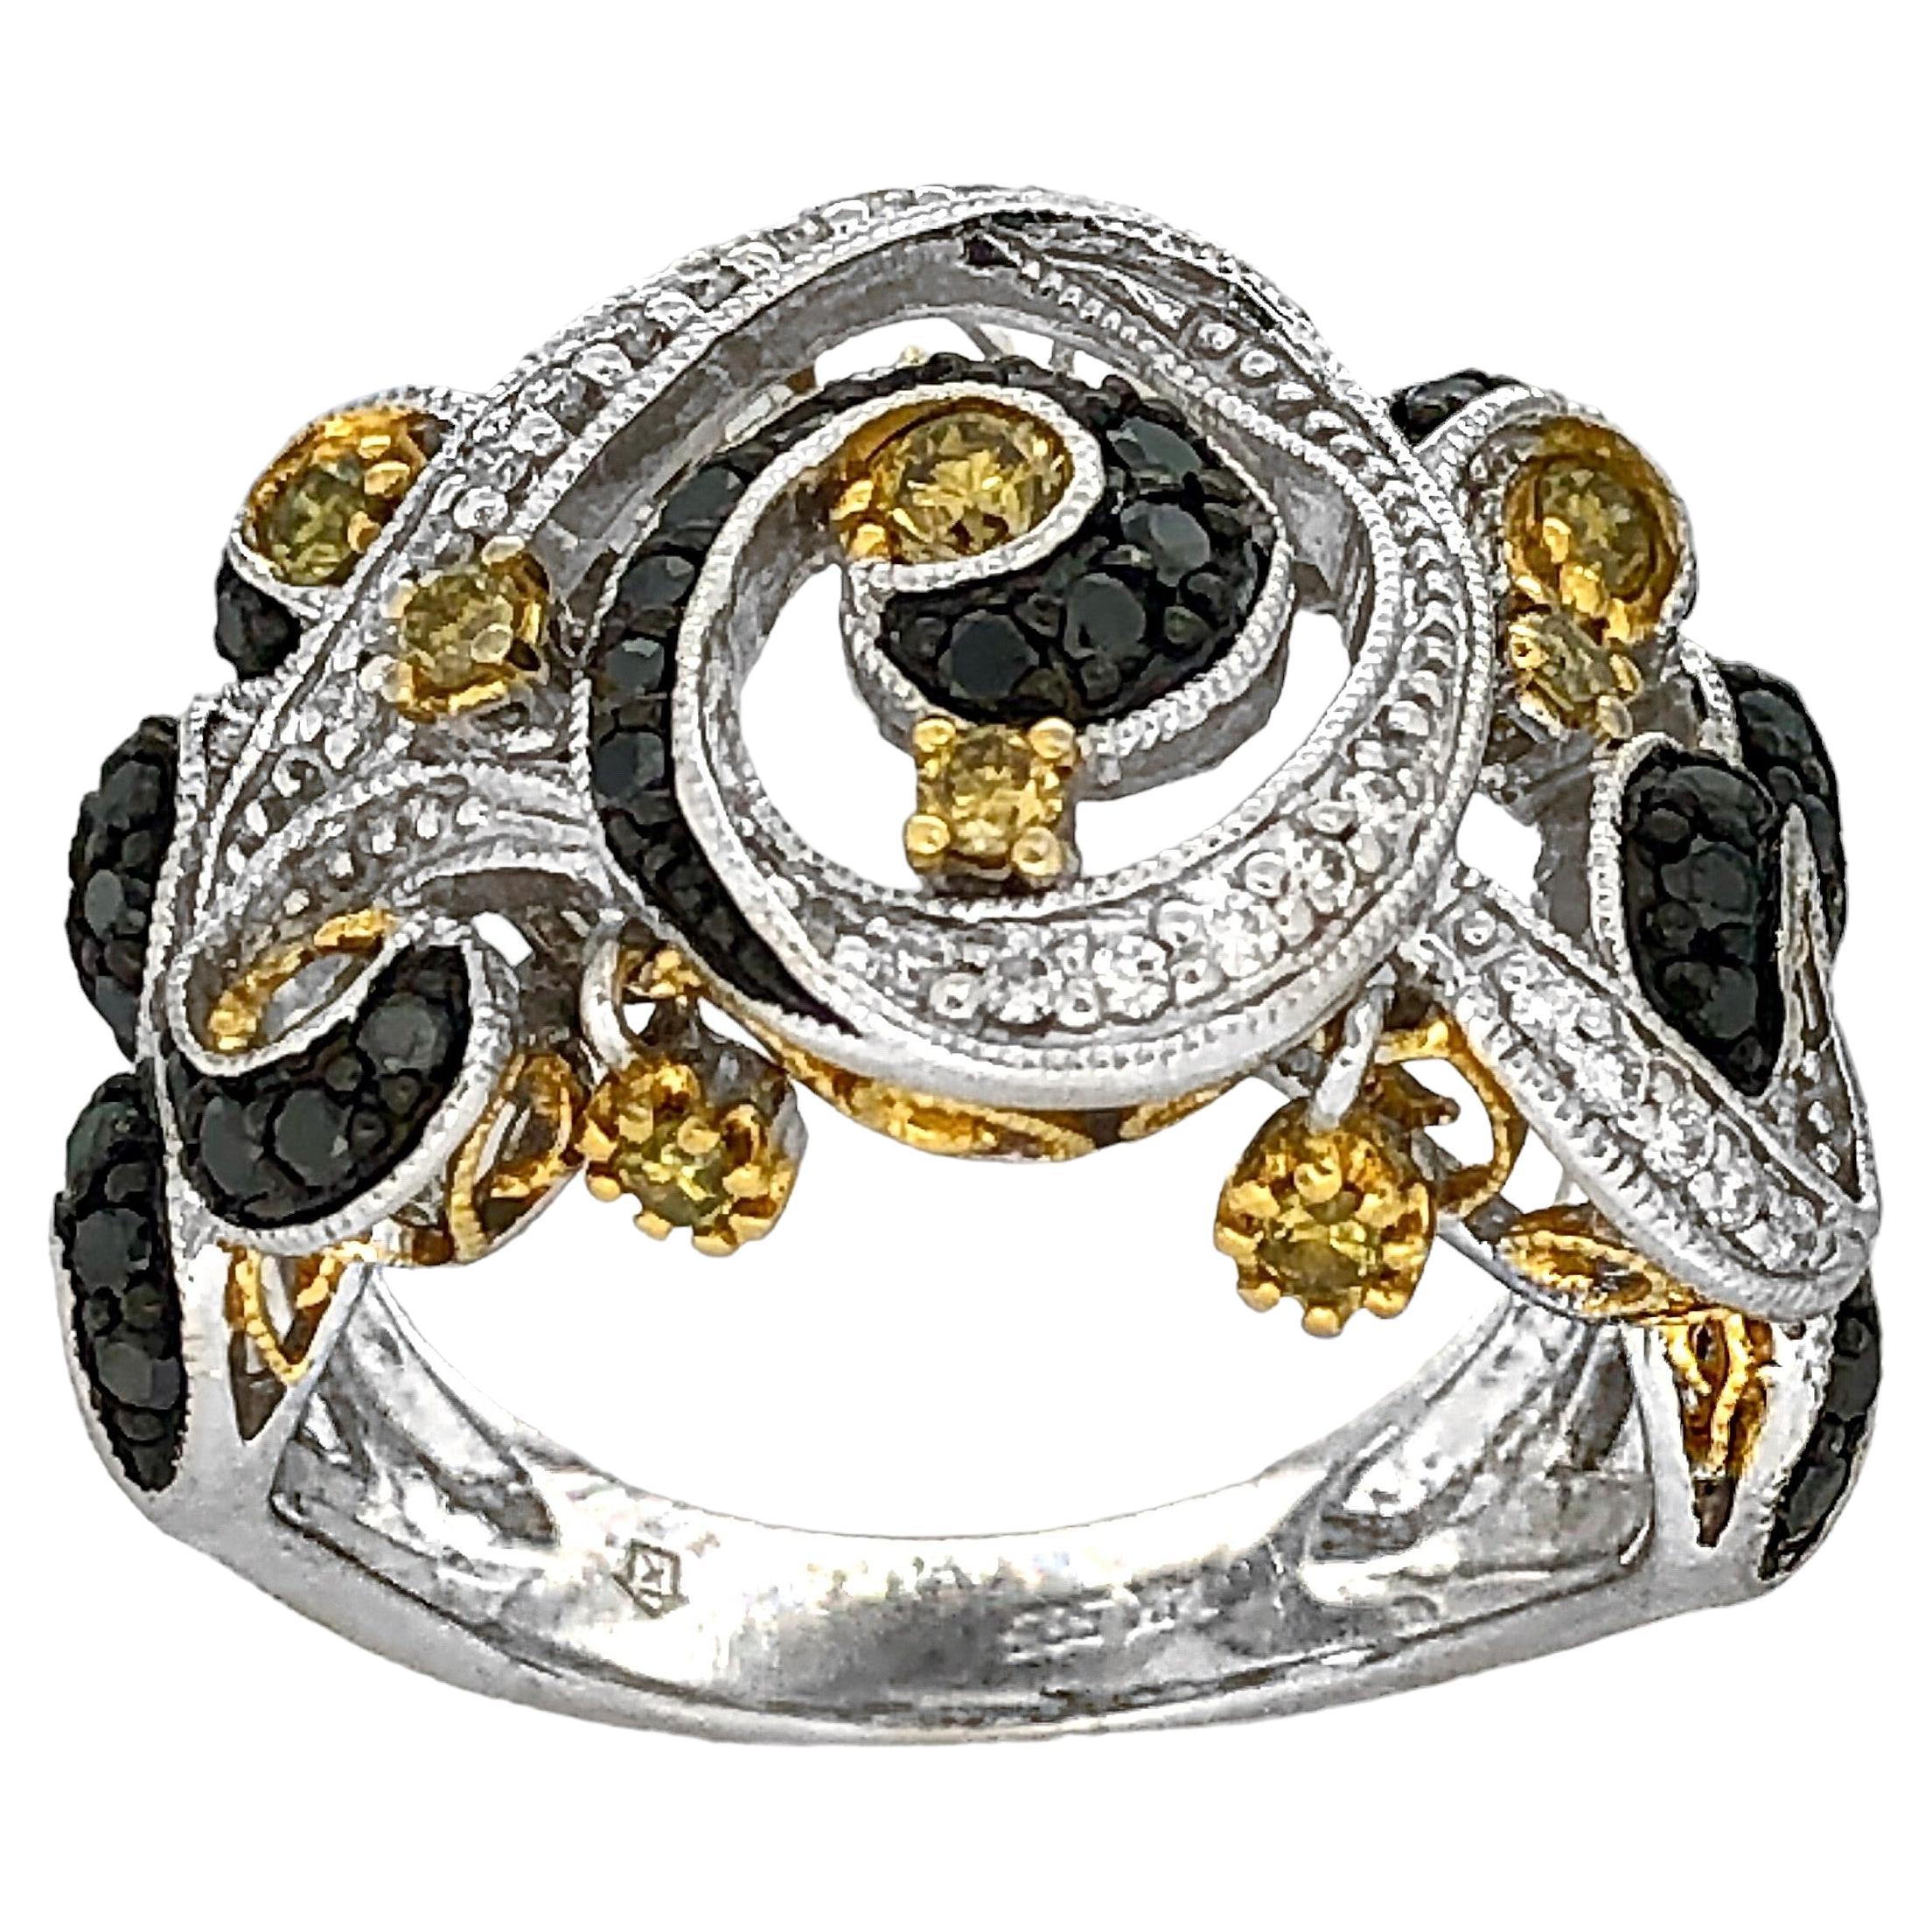 This modern 14K white gold ring is set with white, black and fancy yellow diamonds, all in billowing swirls. The effect is truly that of the piece being in motion. Total approximate diamond weight is 1.50ct.  Ring  size 5 3/4.  Stamped inside are